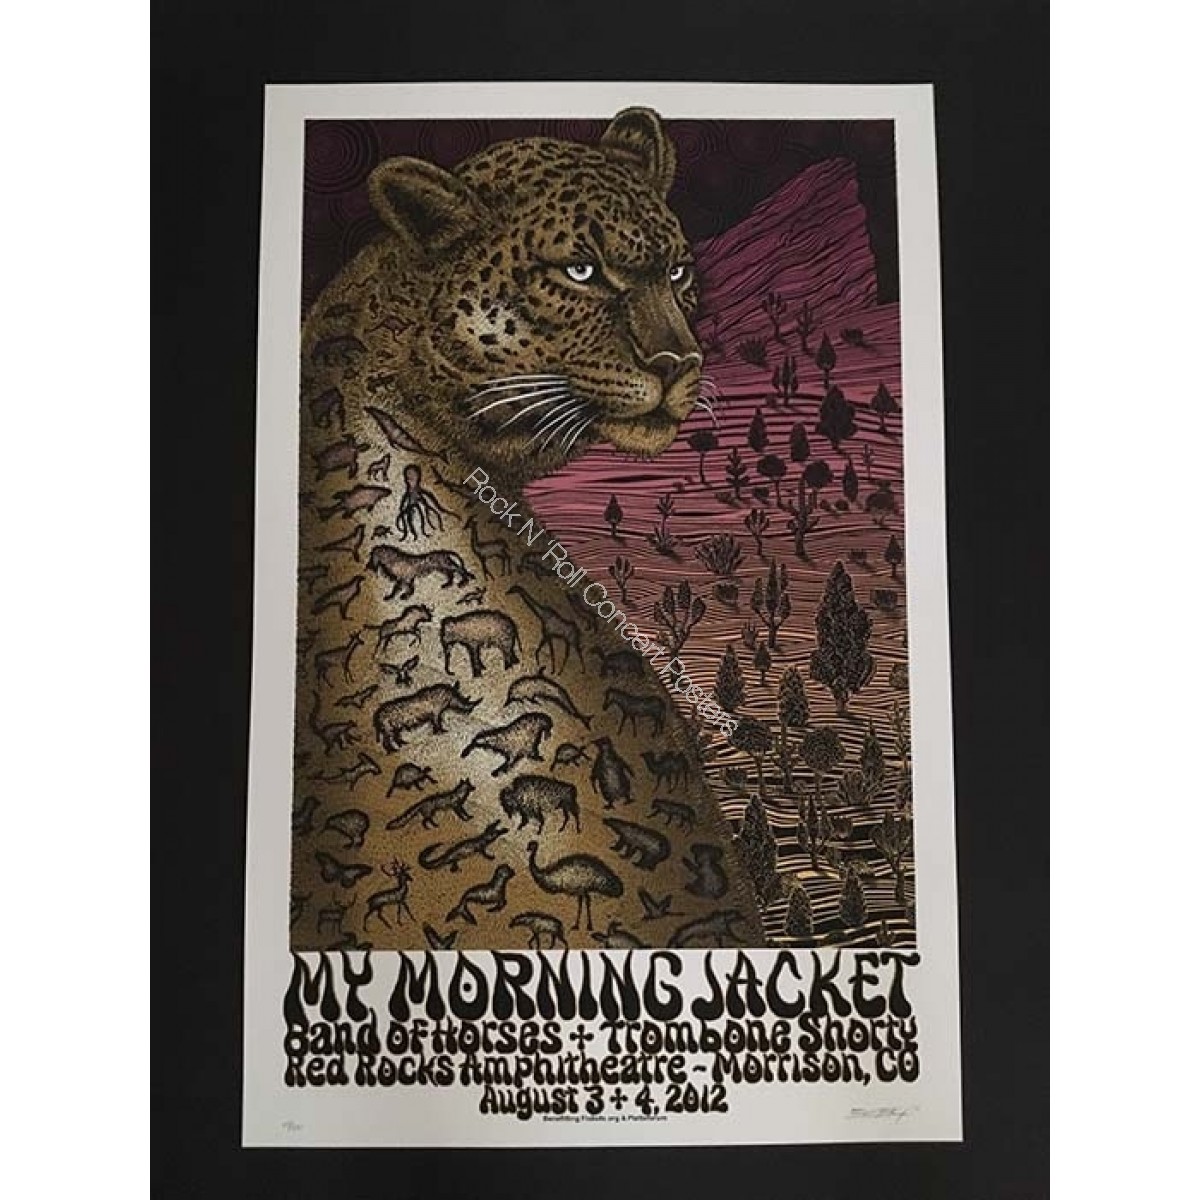 My Morning Jacket & Band Of Horses , Trombone Shorty @ Red Rocks 8/4/12 Limited Edition Print S/N Edition of 330 By Emek